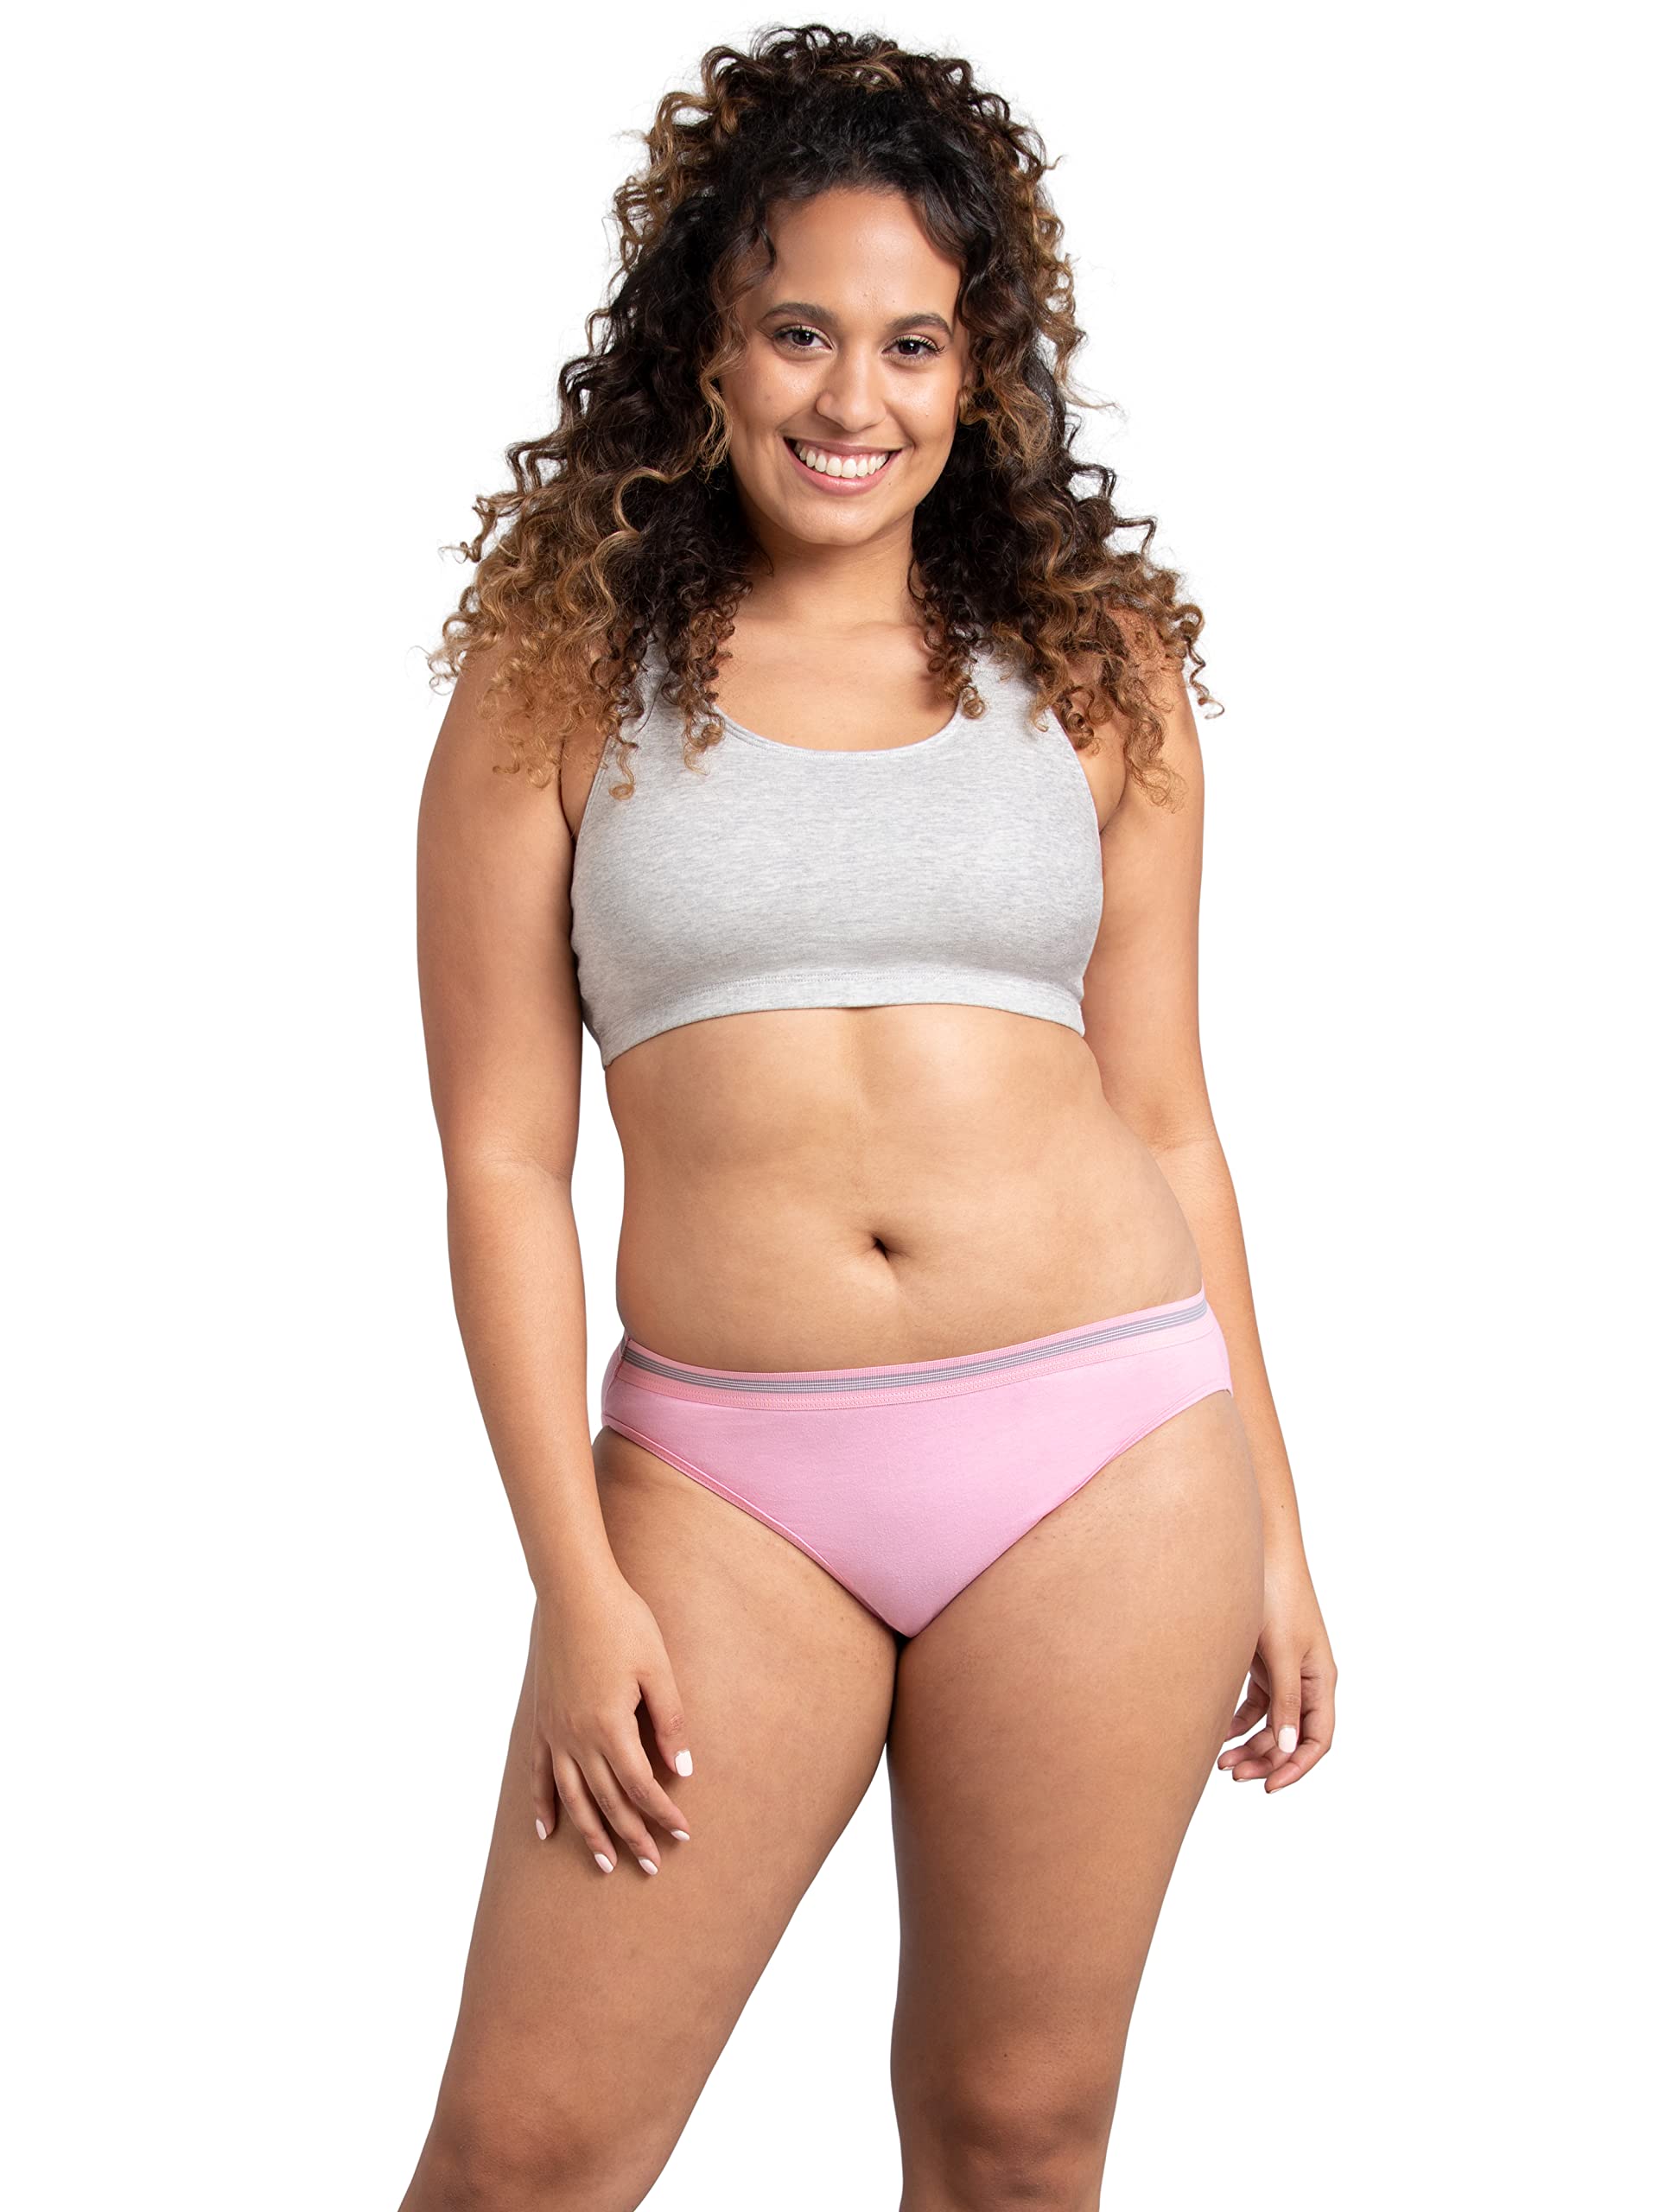 Fruit of the Loom Women's Eversoft Cotton Bikini Underwear, Tag Free & Breathable